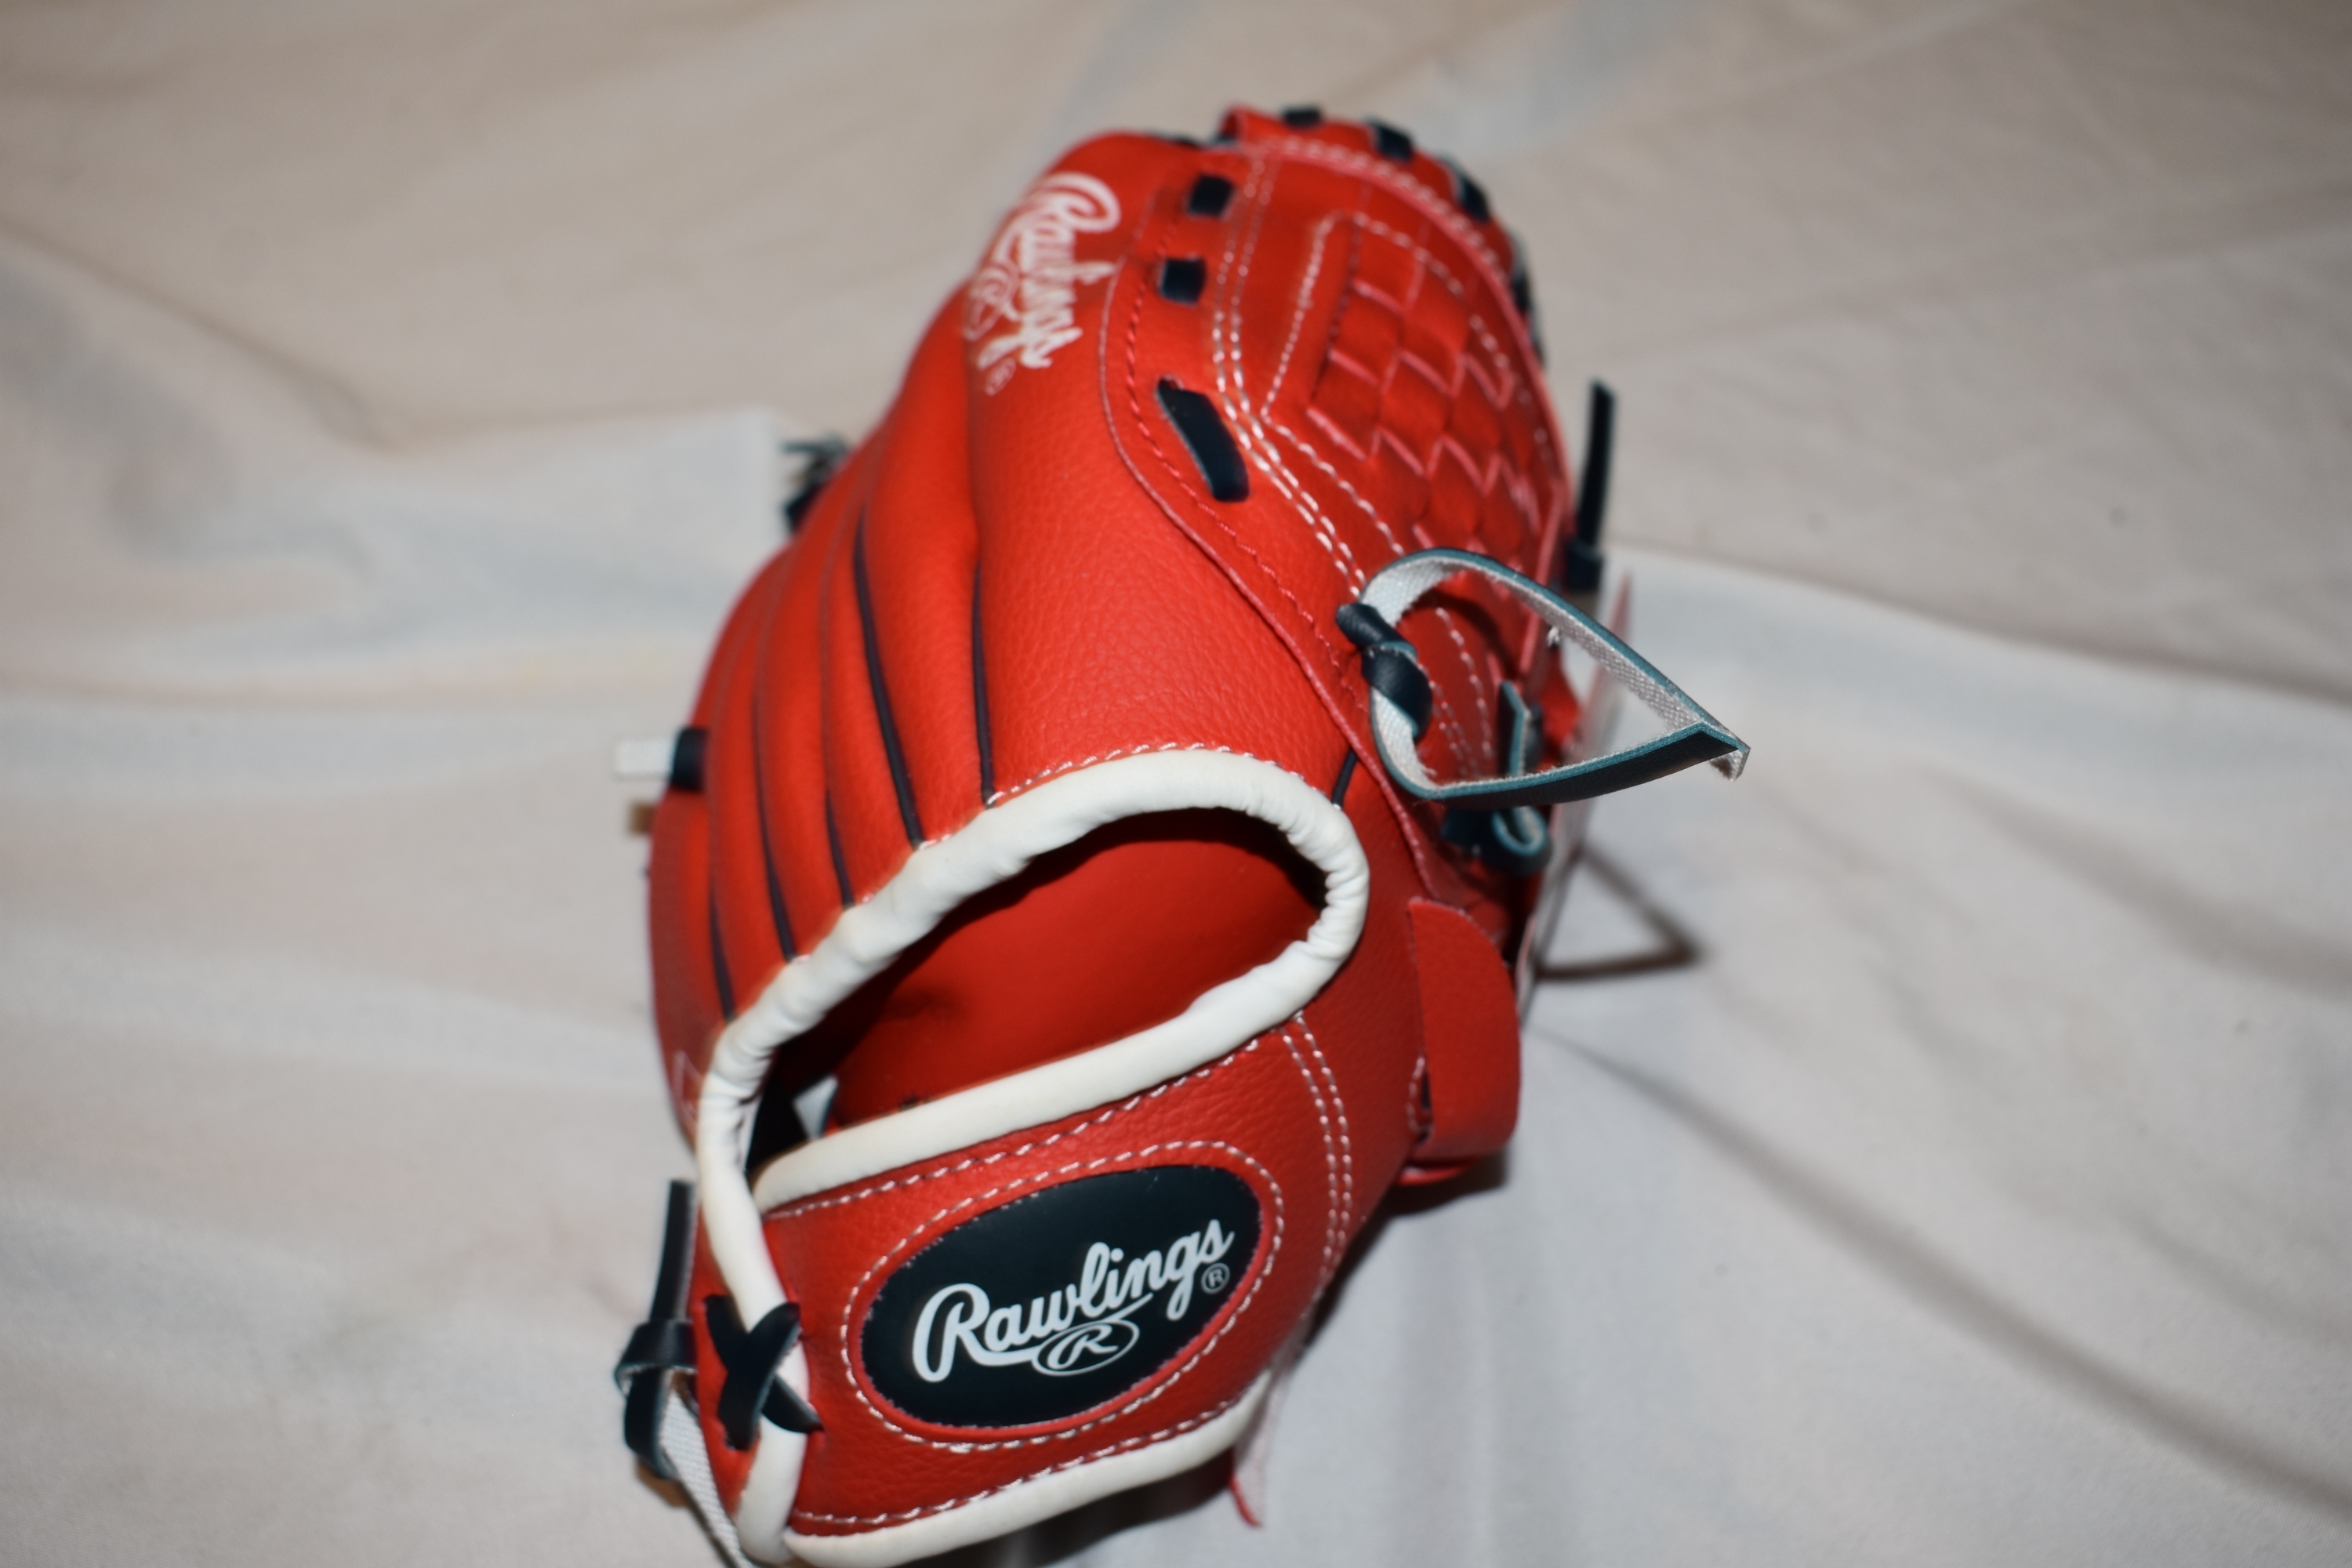 Rawlings Player Series Baseball Glove PL90SN, Red, 9 Inches - Top Condition!